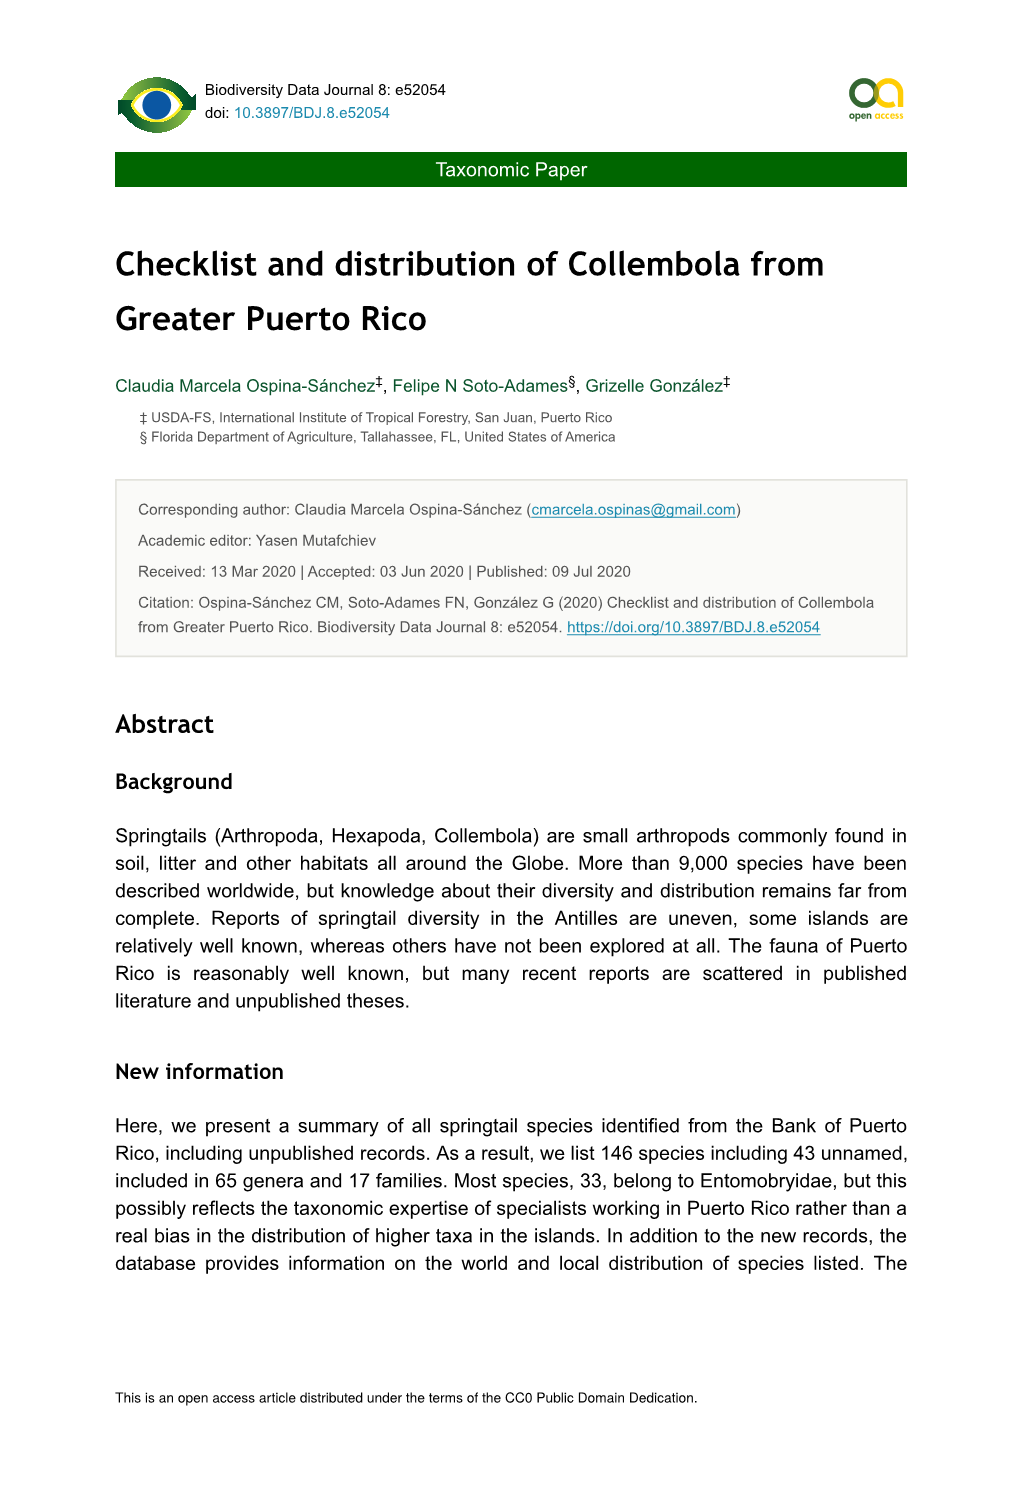 Checklist and Distribution of Collembola from Greater Puerto Rico